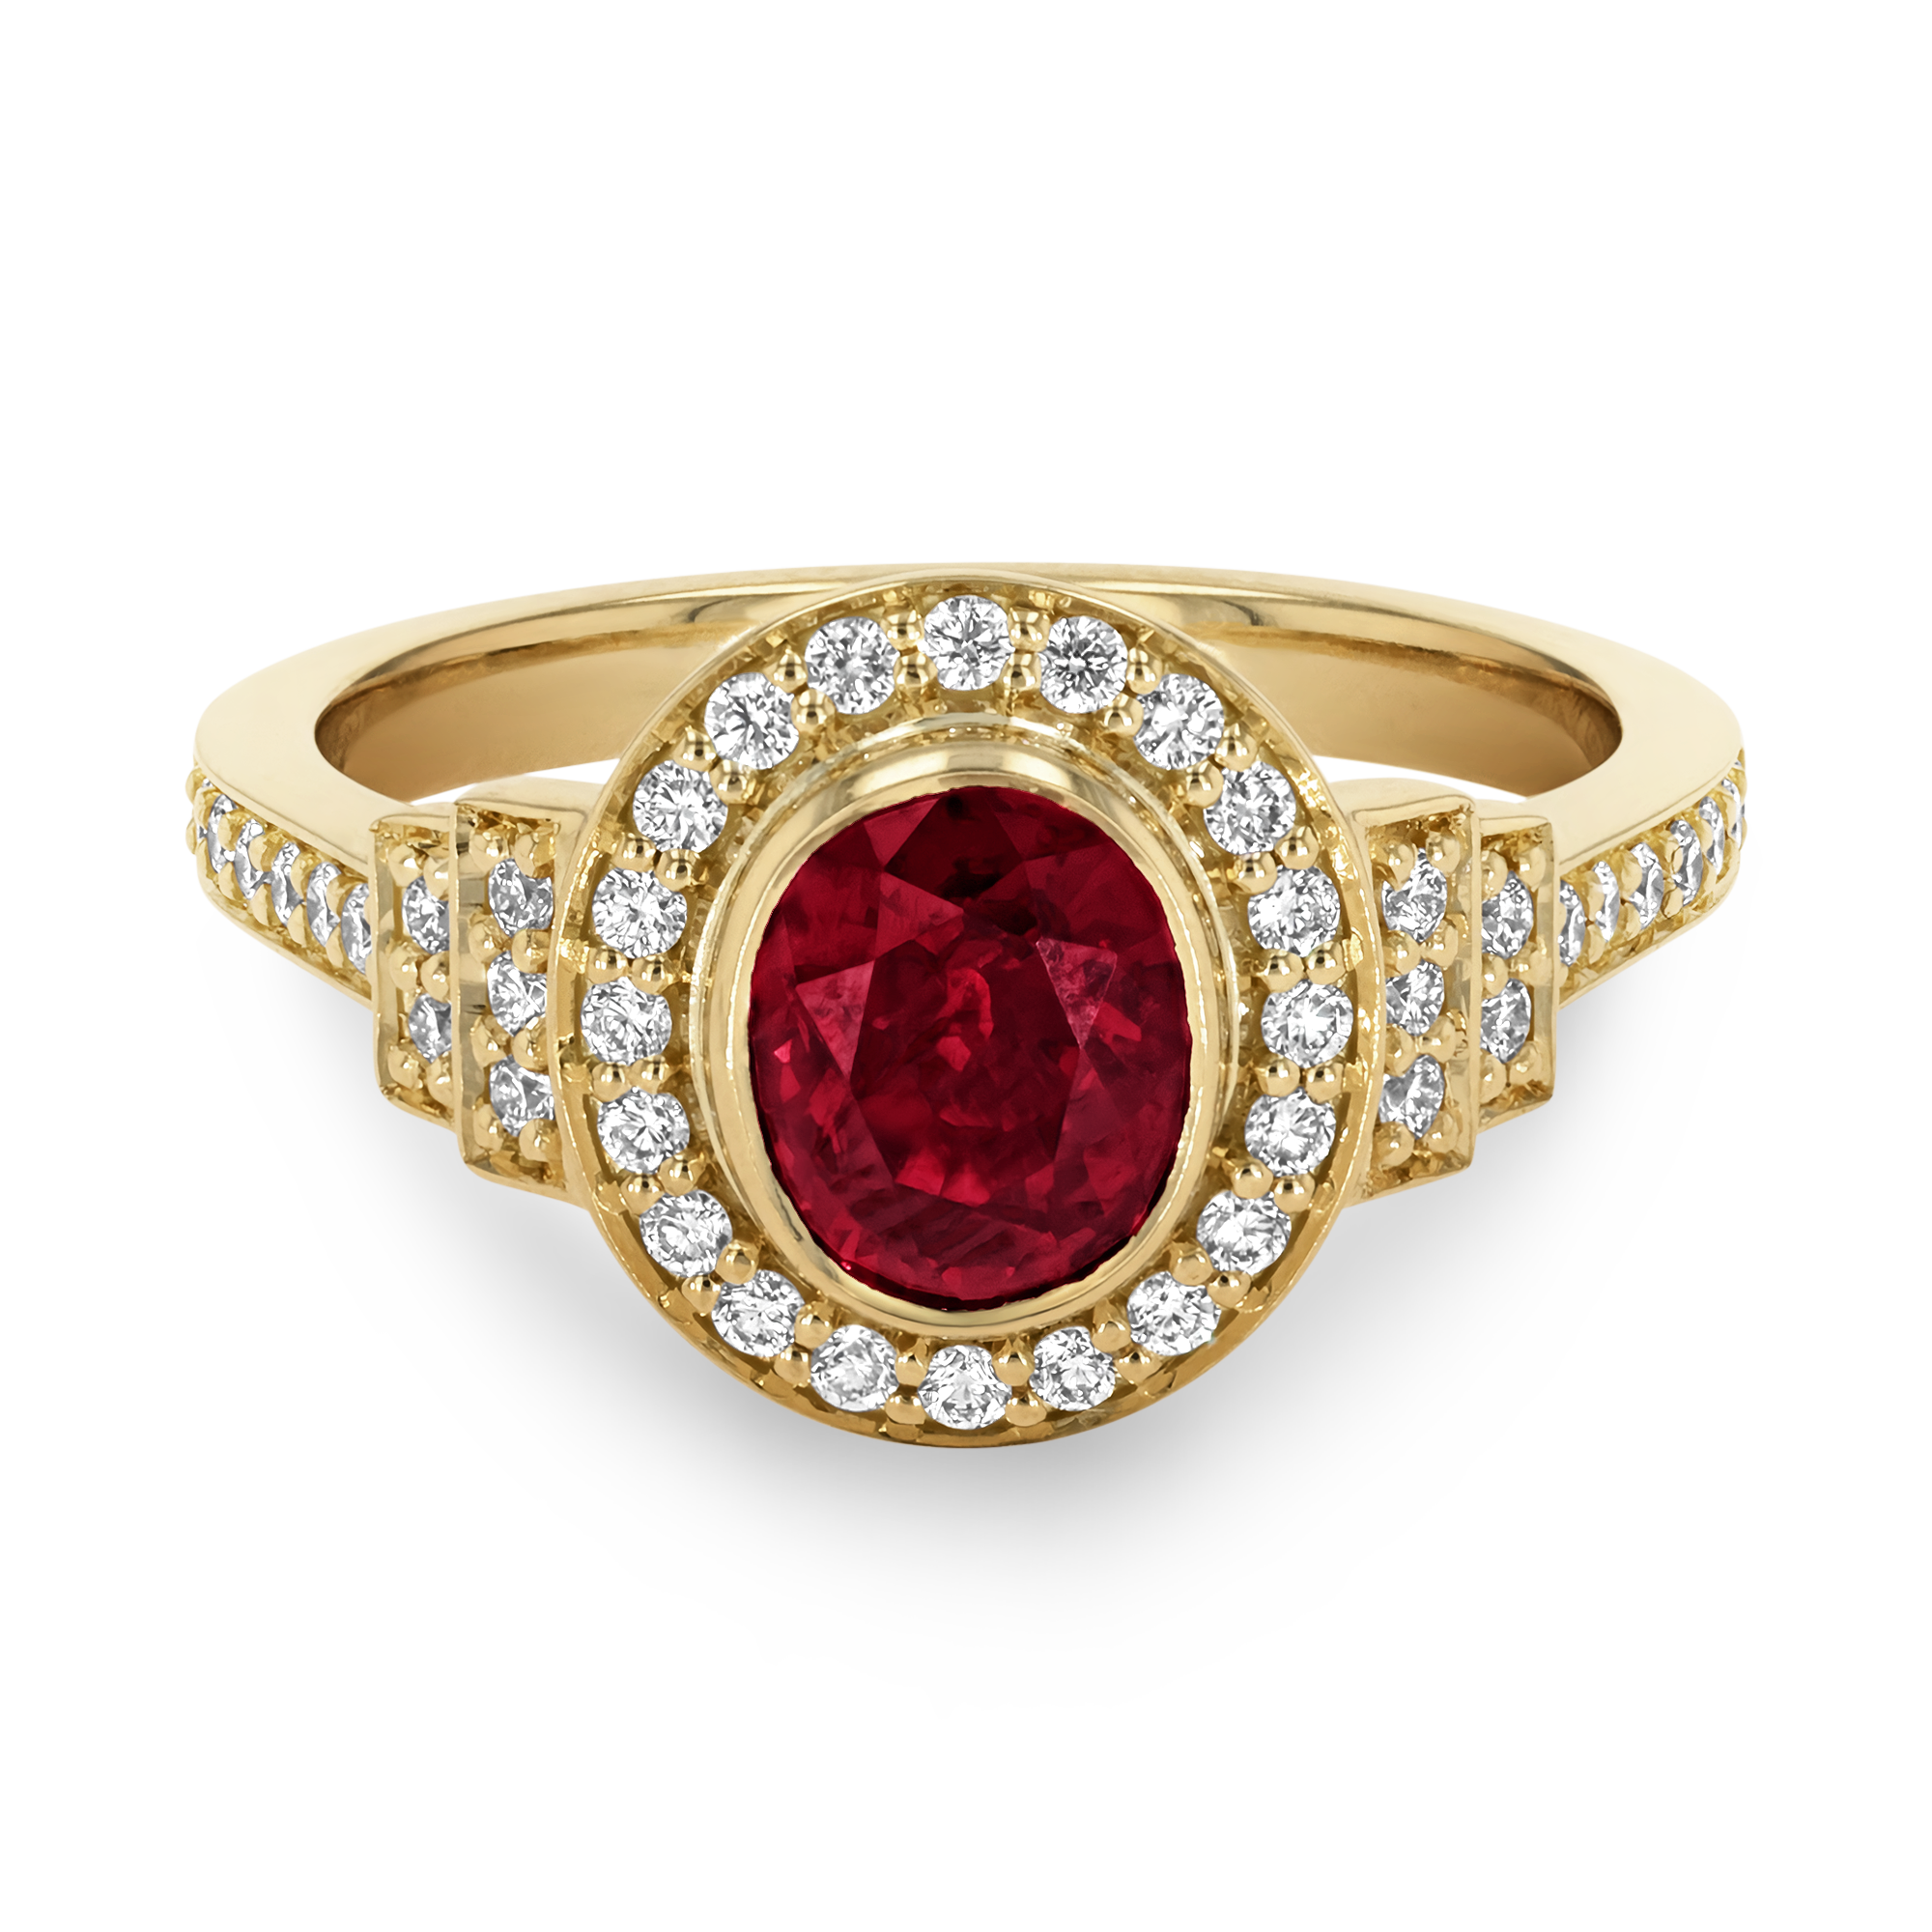 Mozambique 1.61ct Ruby and Diamond Cluster Ring Oval Cut, Rubover Set_2